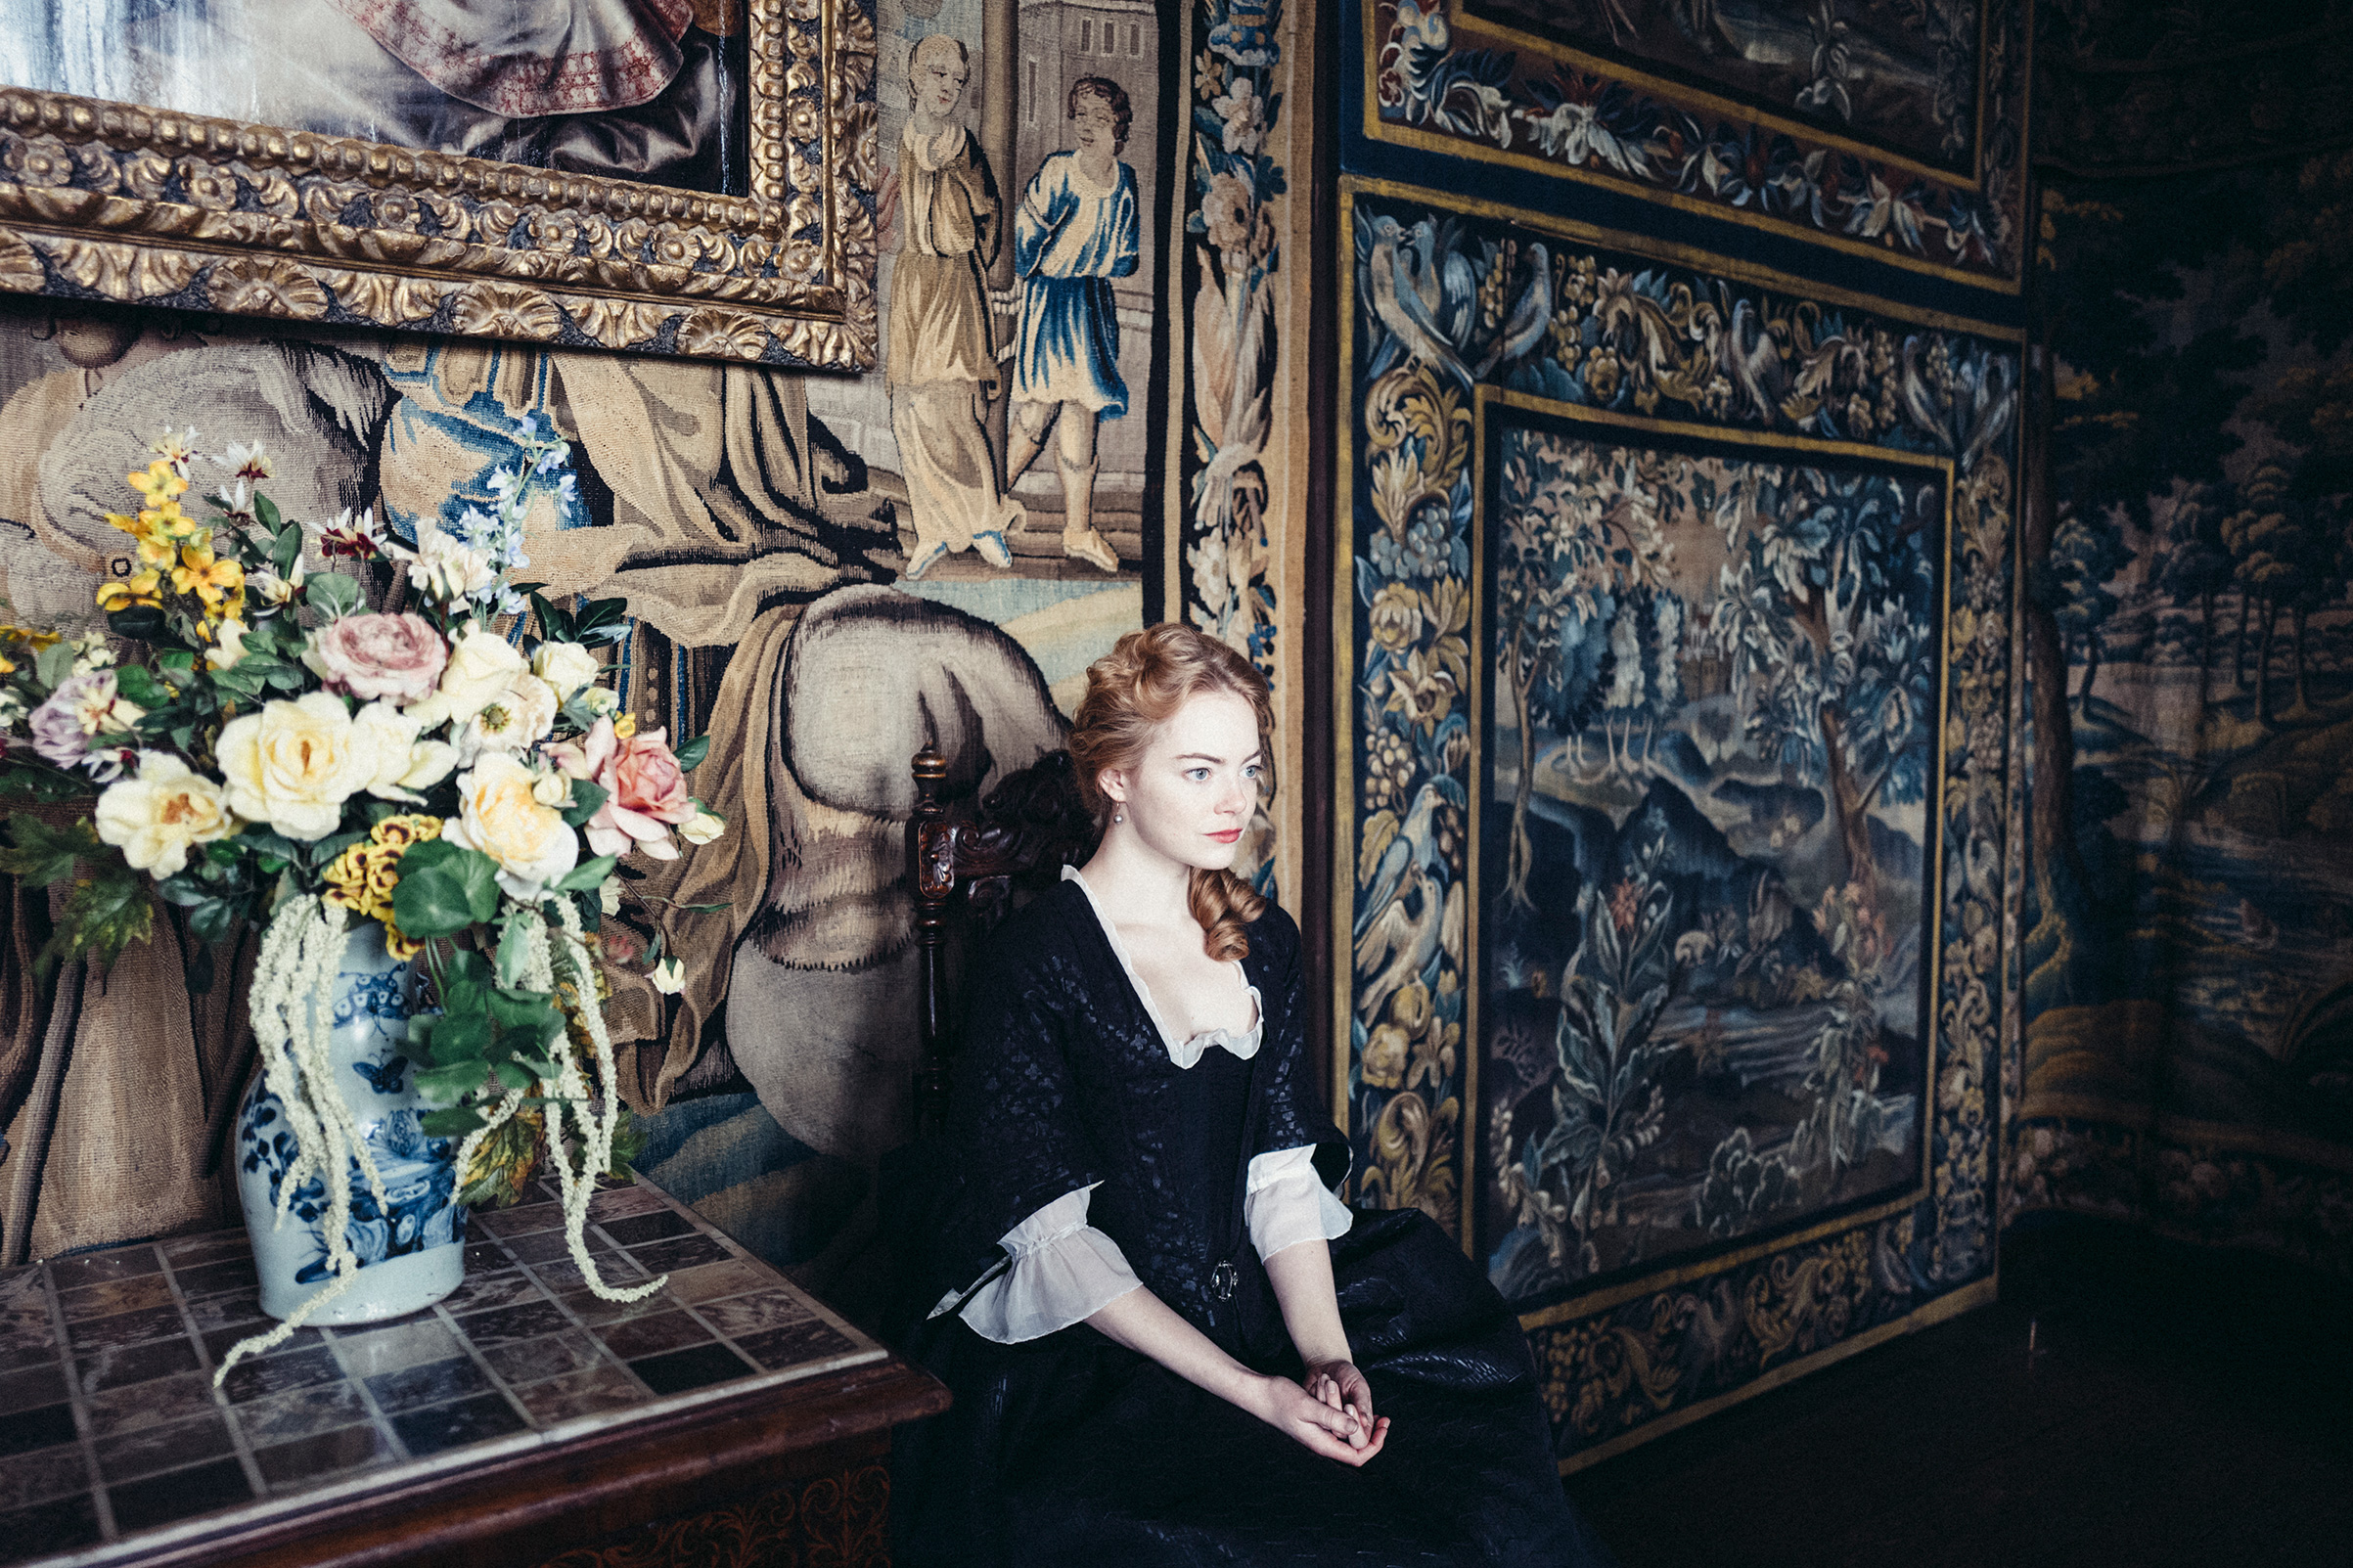 Emma Stone in the film THE FAVOURITE. Photo by Yorgos Lanthimos. © 2018 Twentieth Century Fox Film Corporation All Rights Reserved